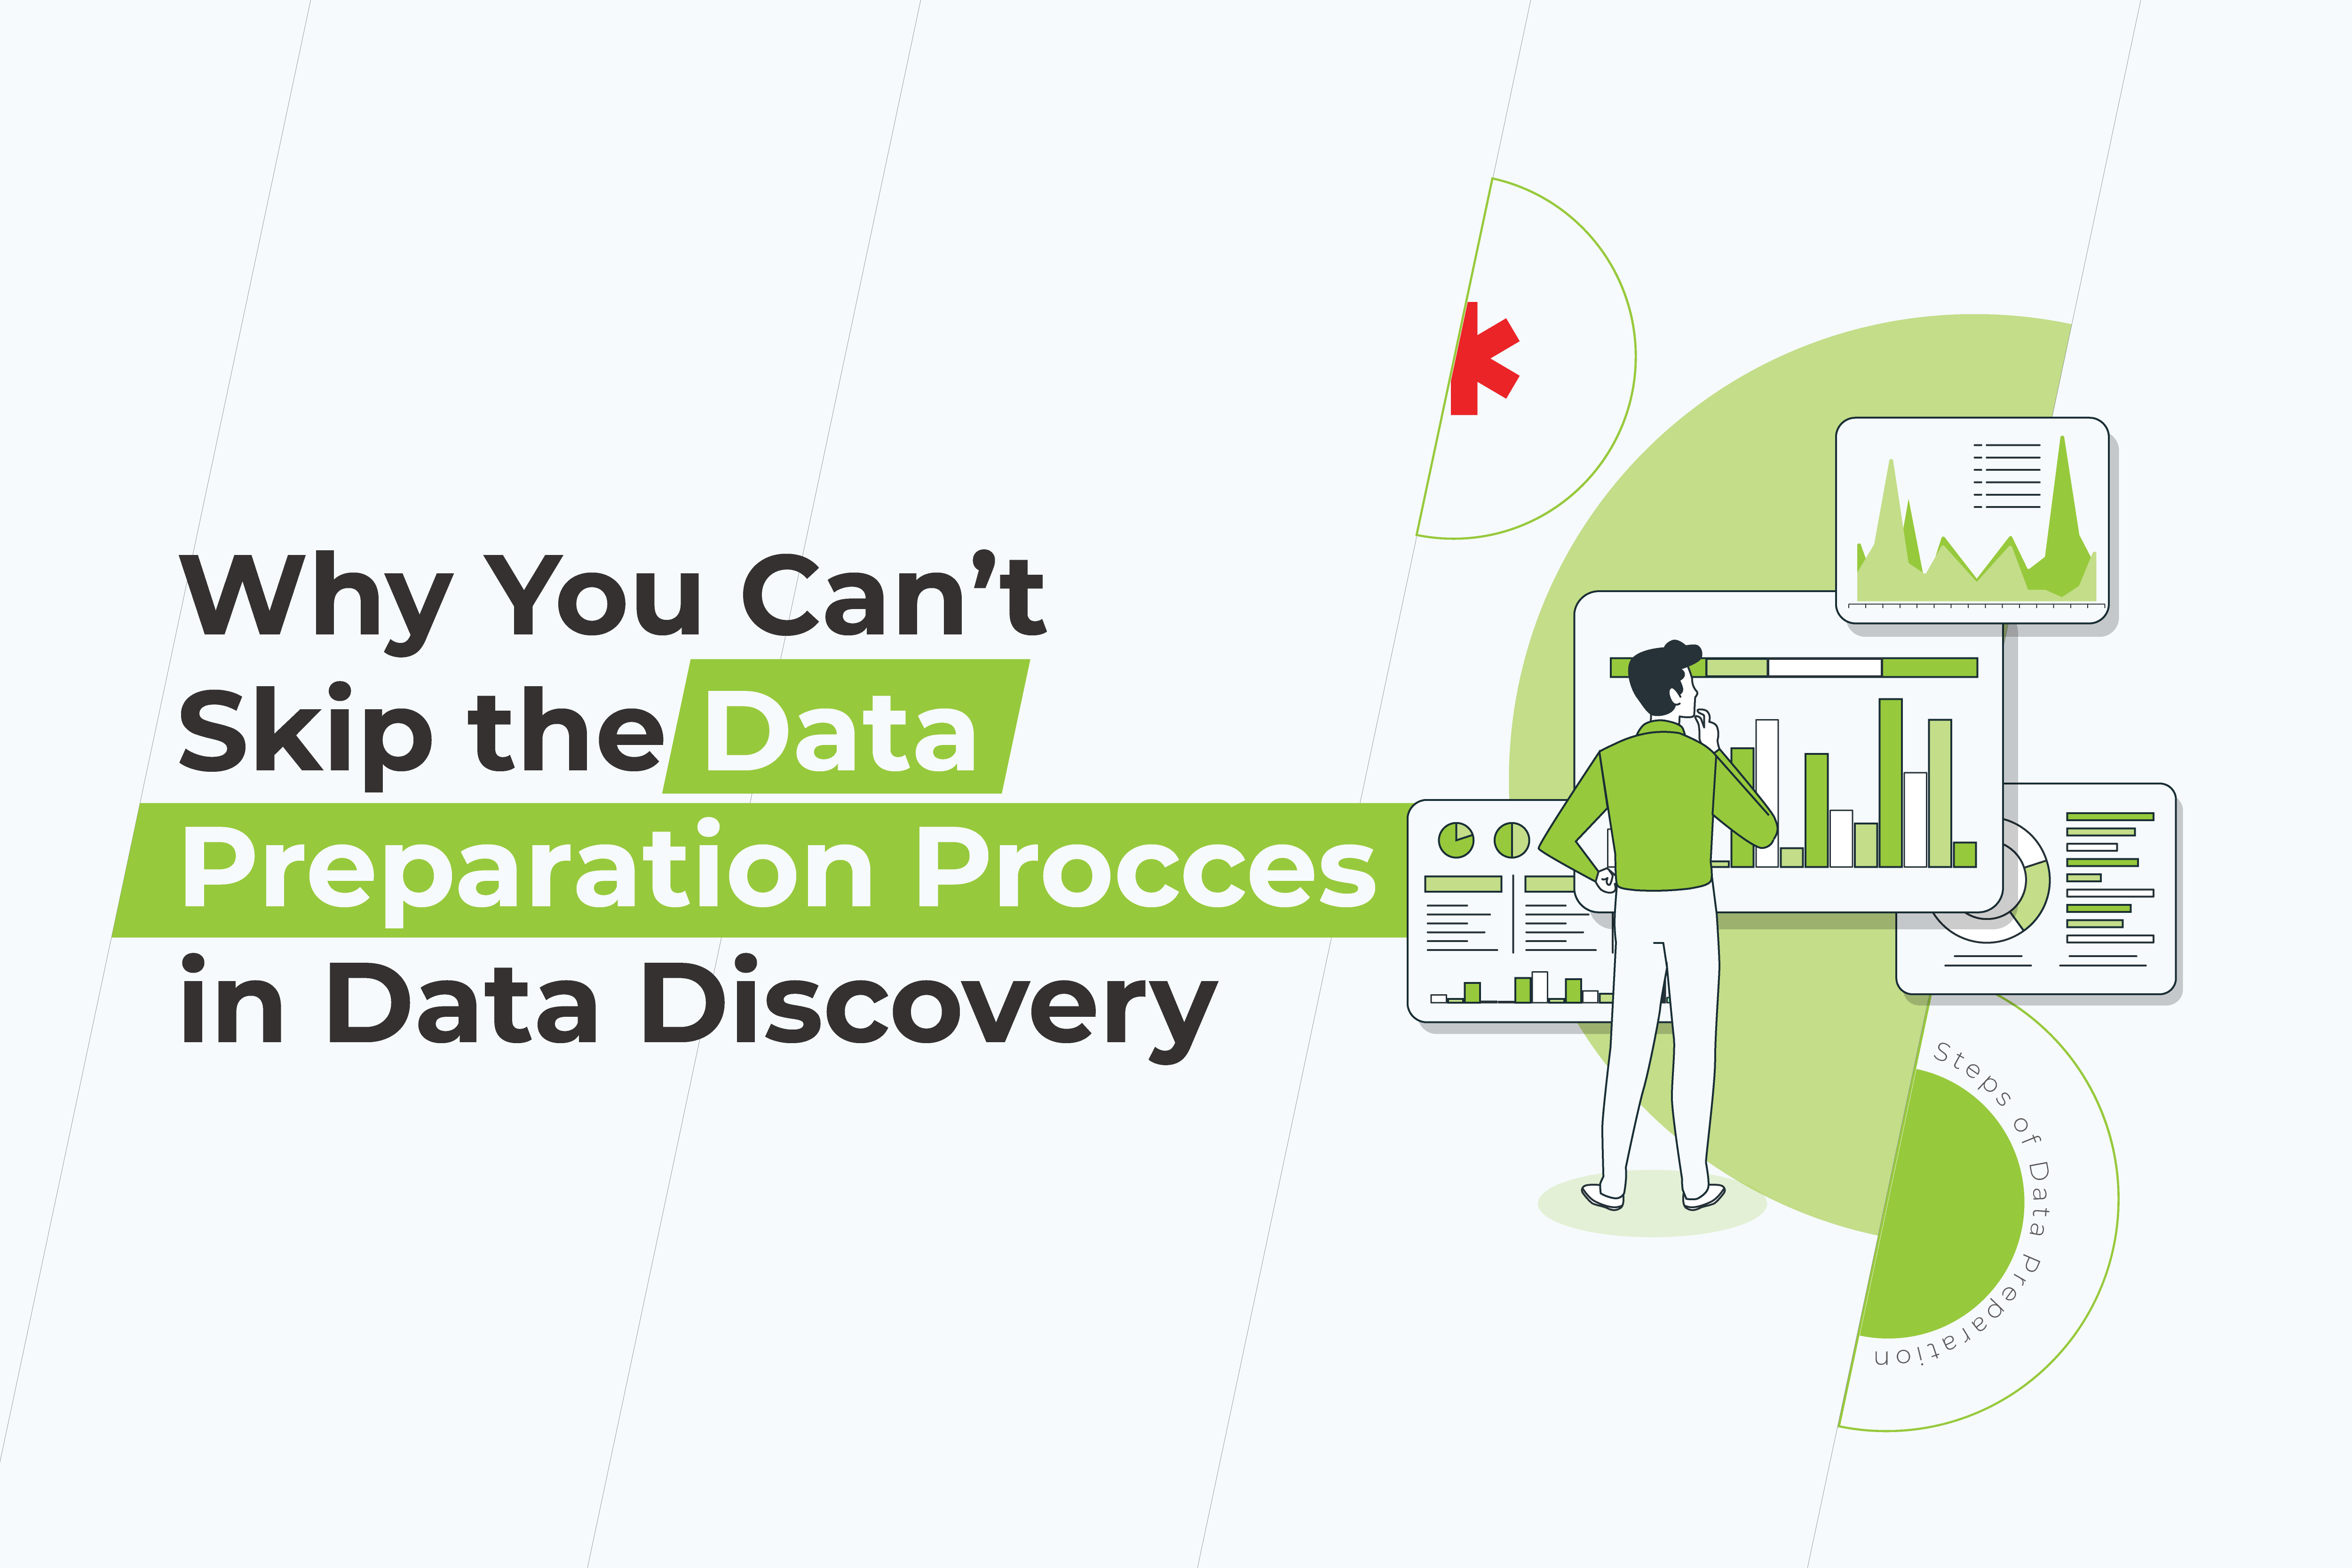 Why You Can’t Skip the Data Preparation Process in Data Discovery